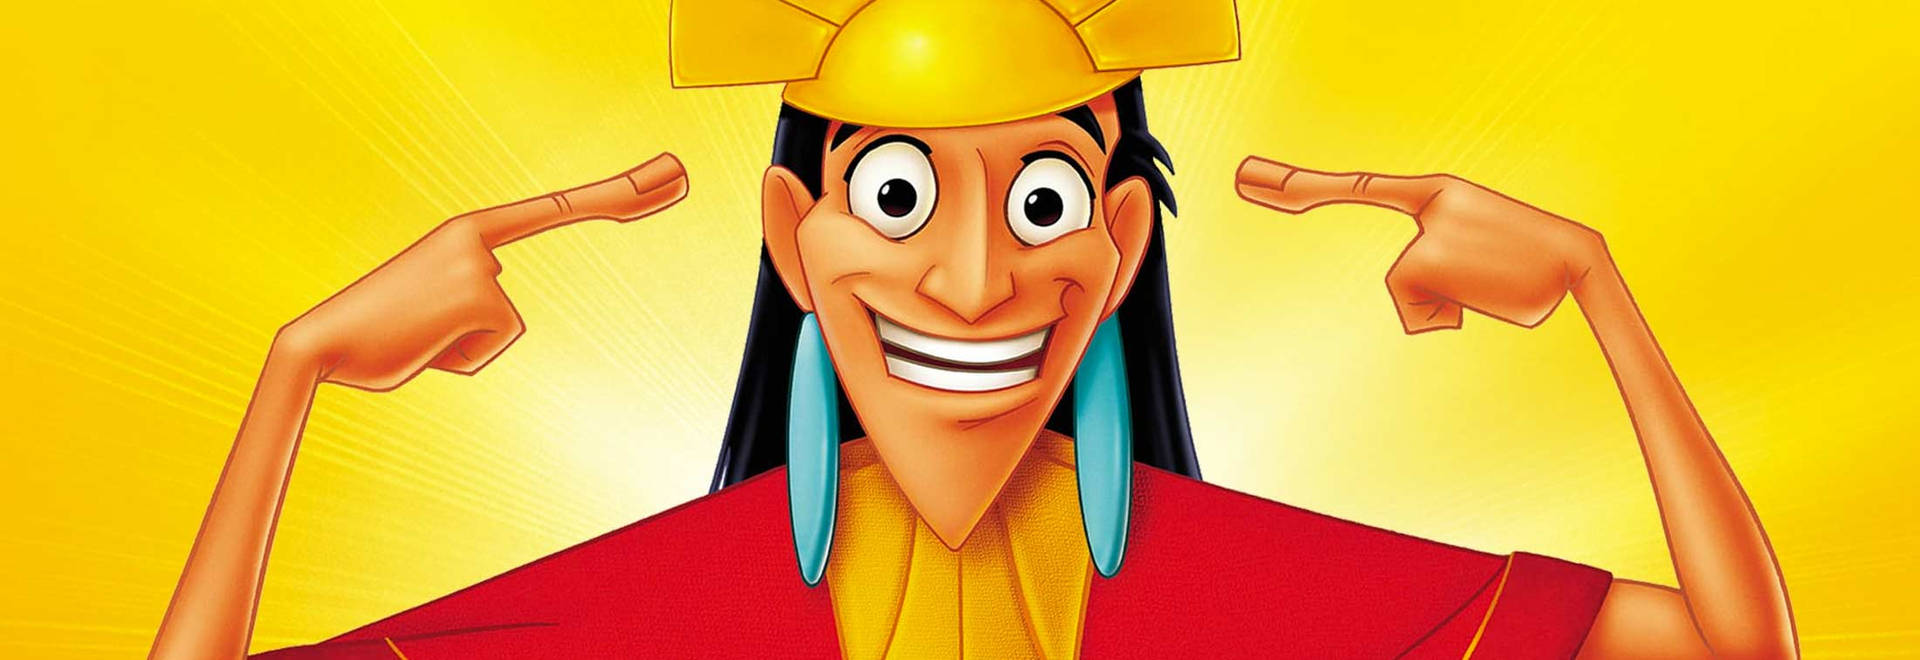 Funny Kuzco The Emperors New Groove Wallpaper